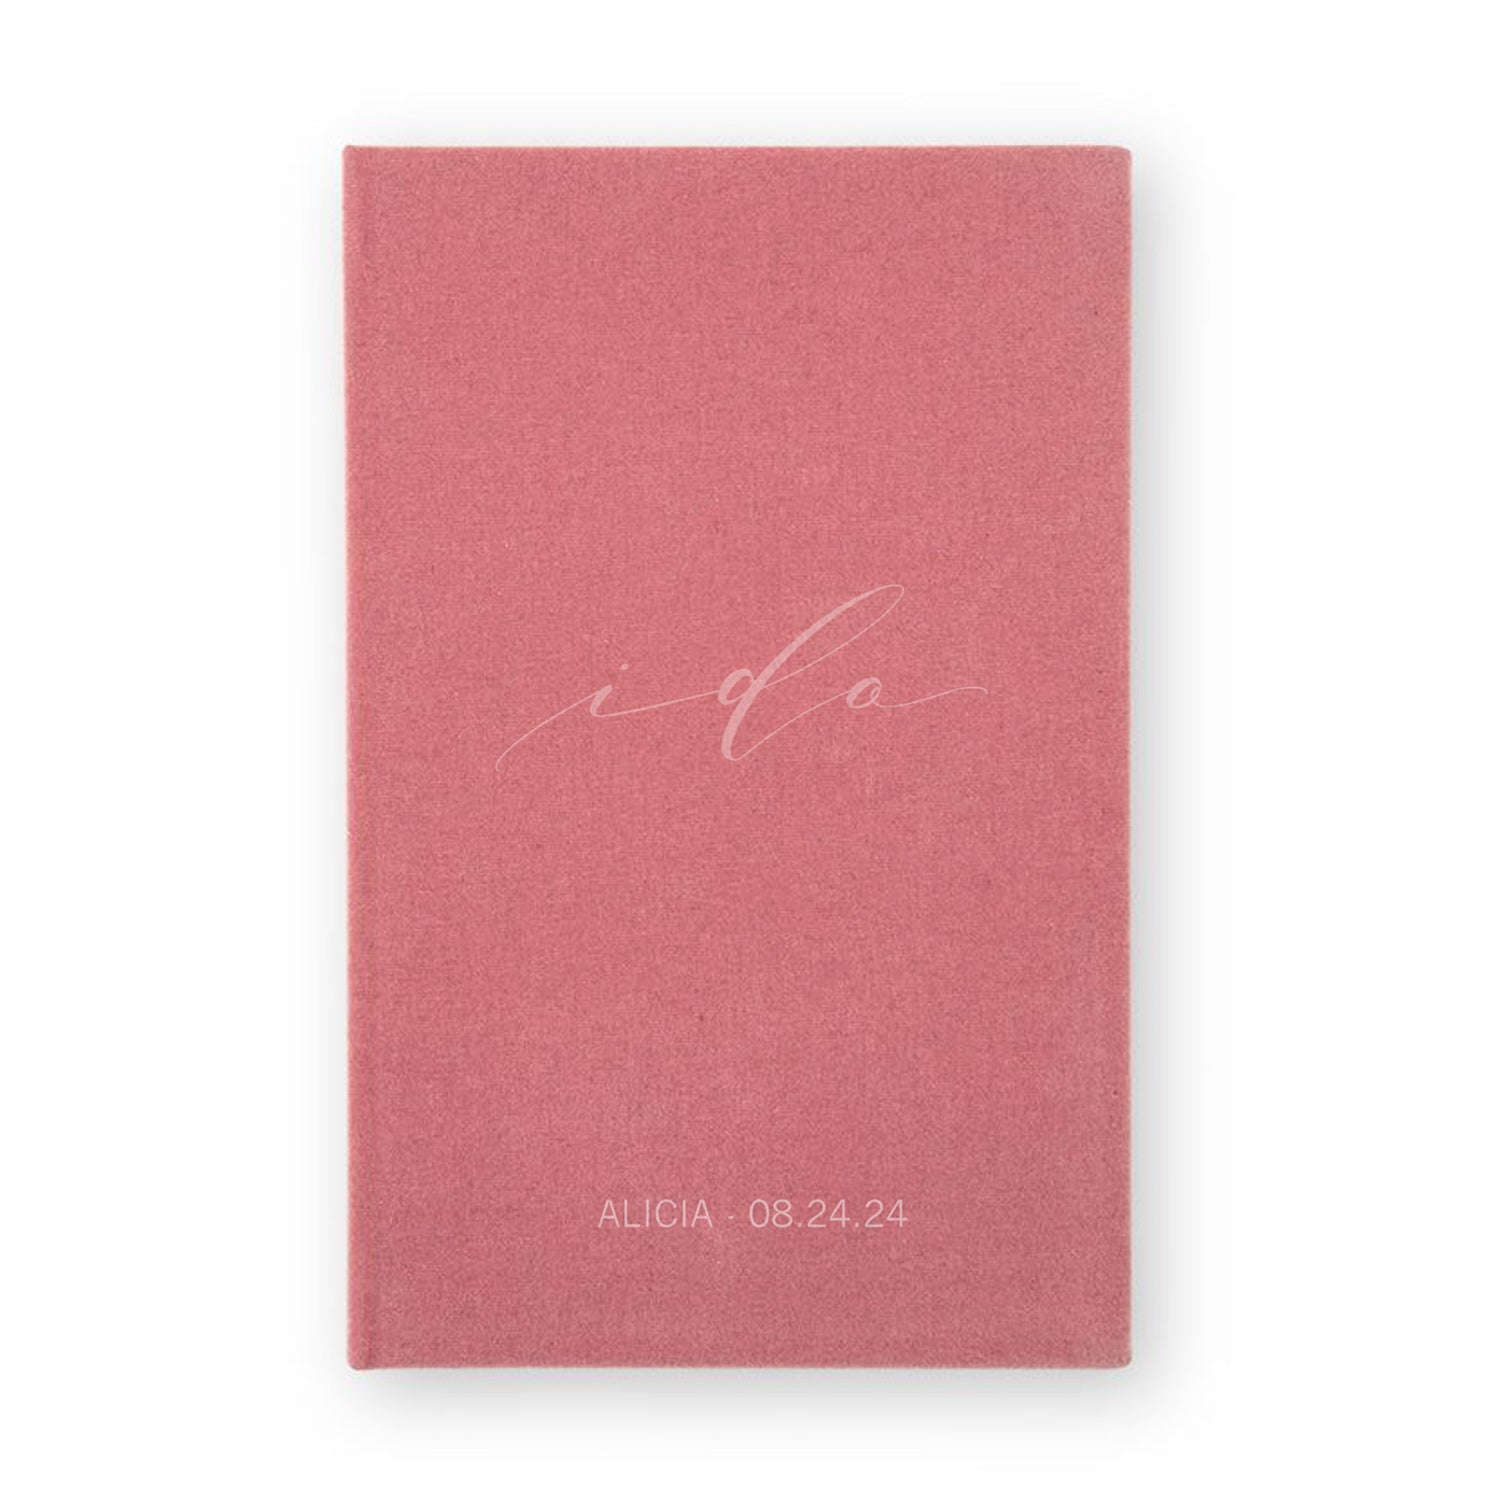 I Do Vow Book - Pink Velvet - Pretty Collected